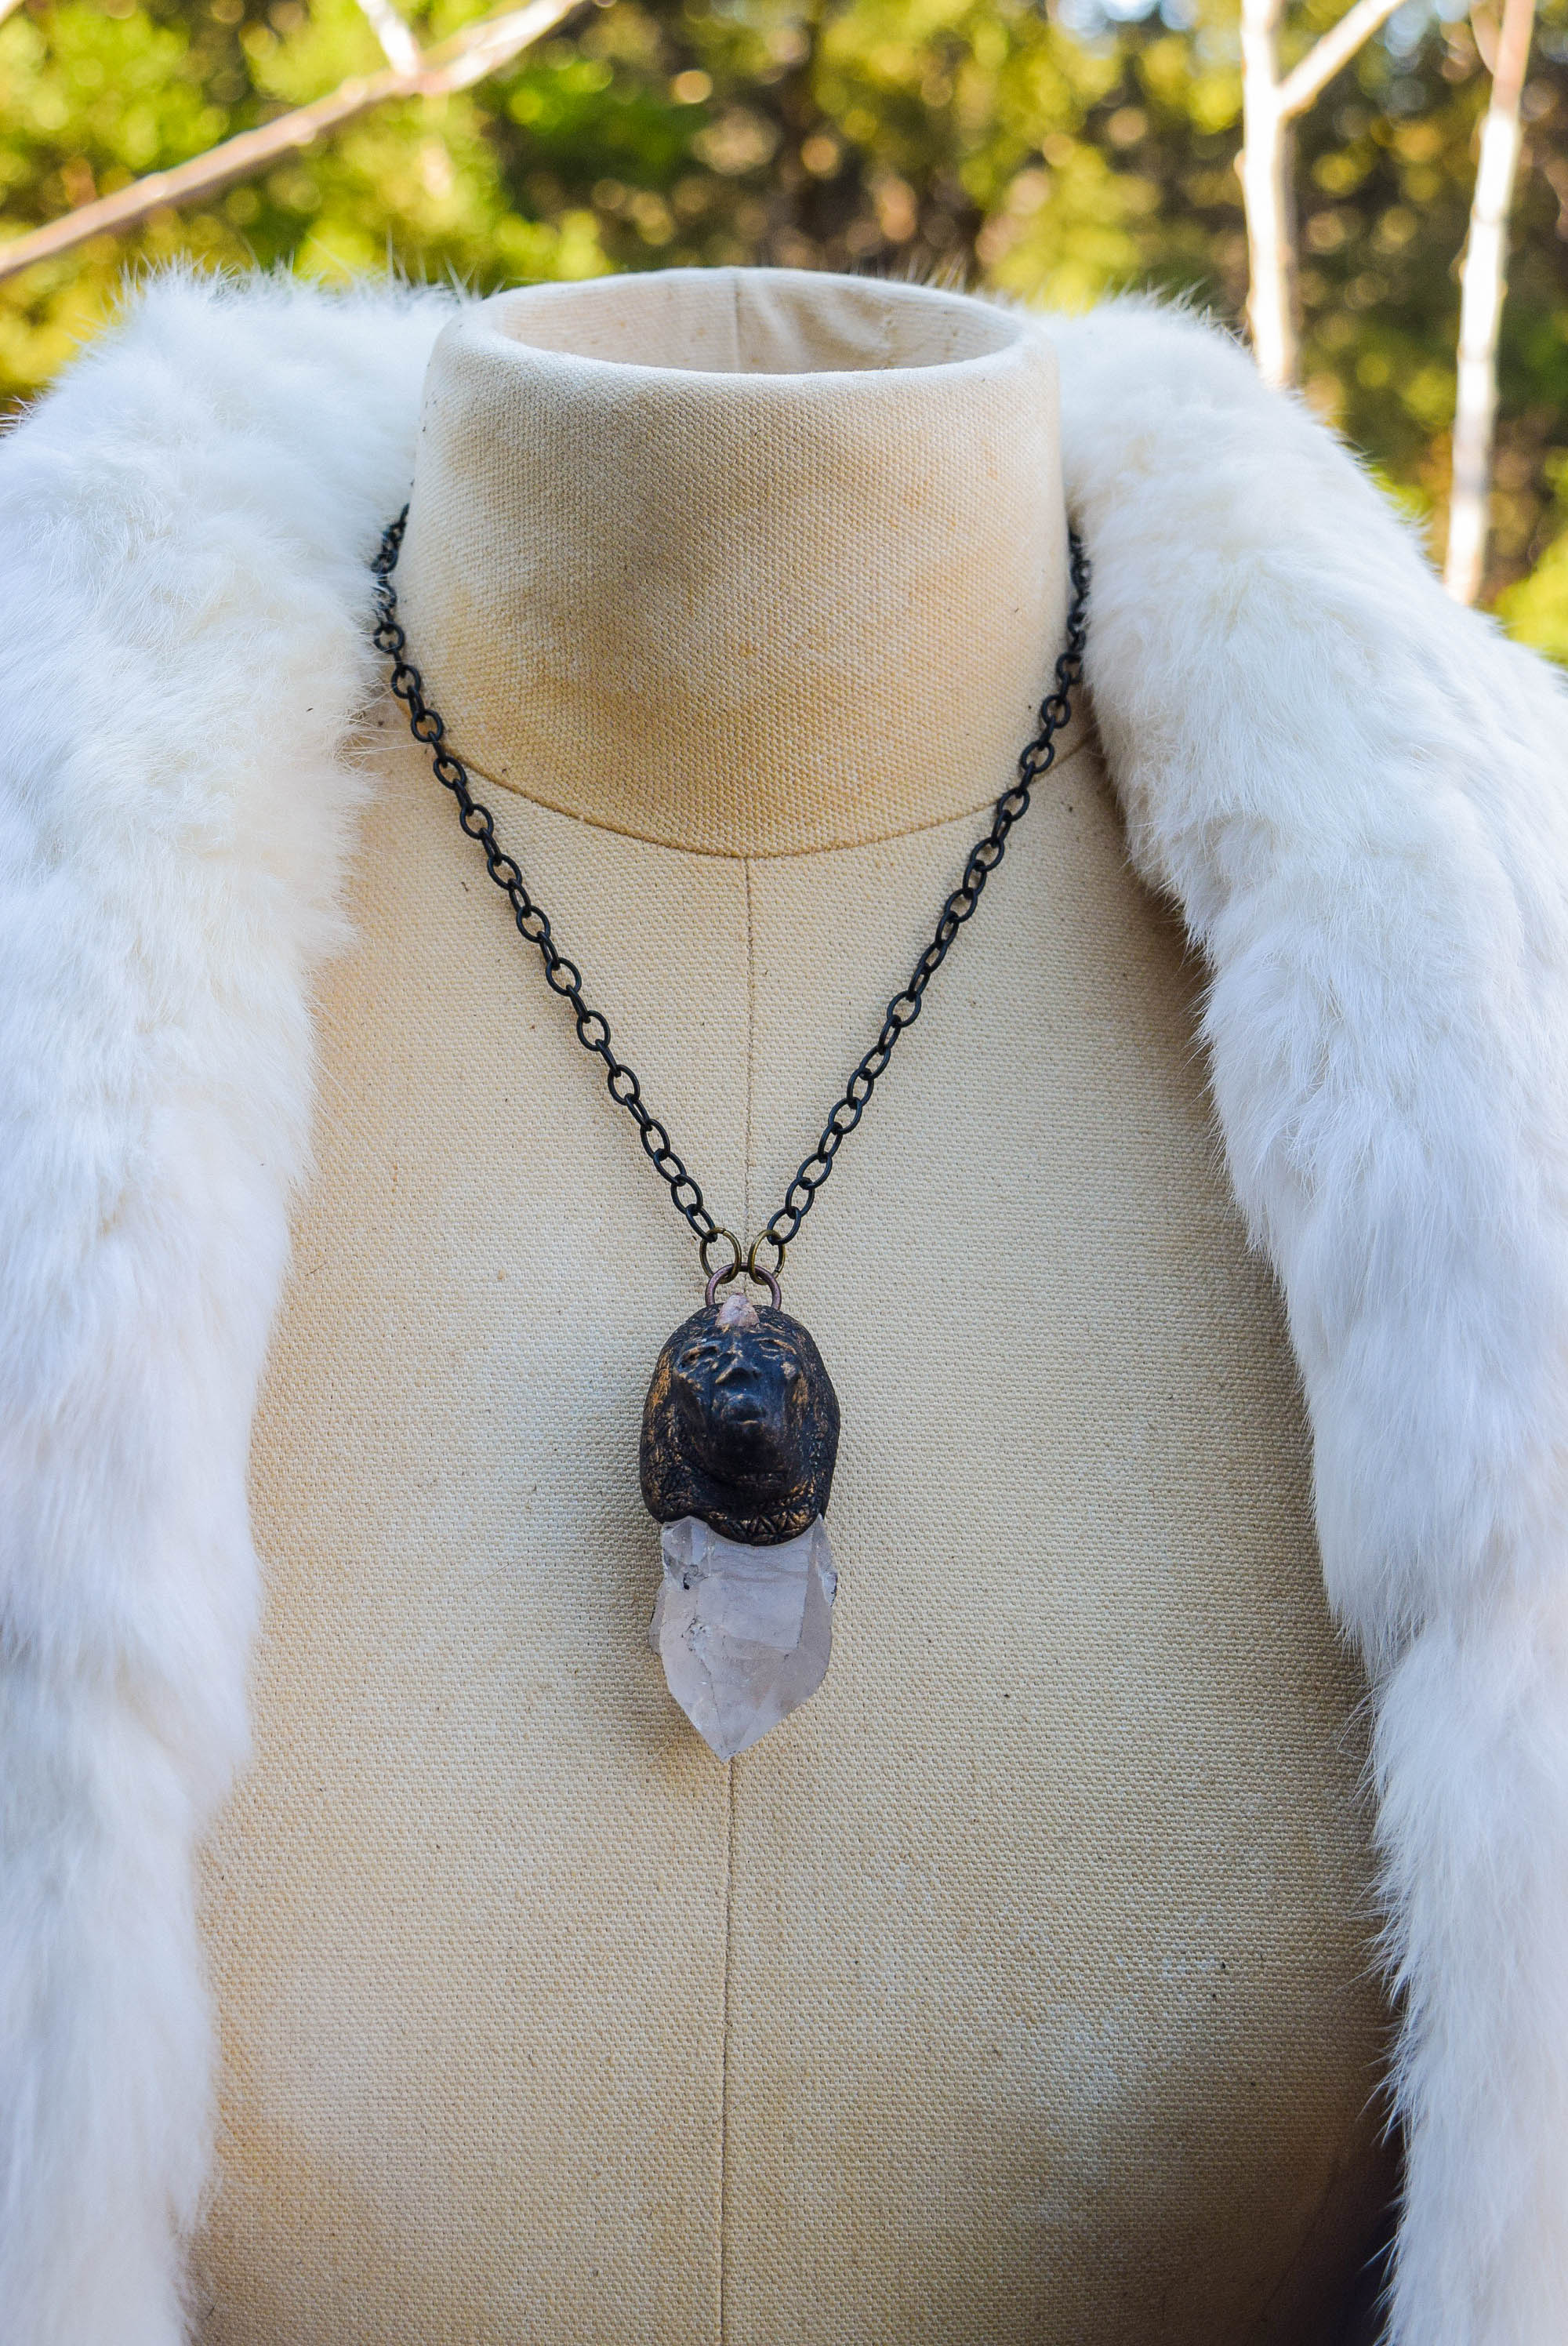 Spirit Necklace for Cleansing, Renewal and and Centering